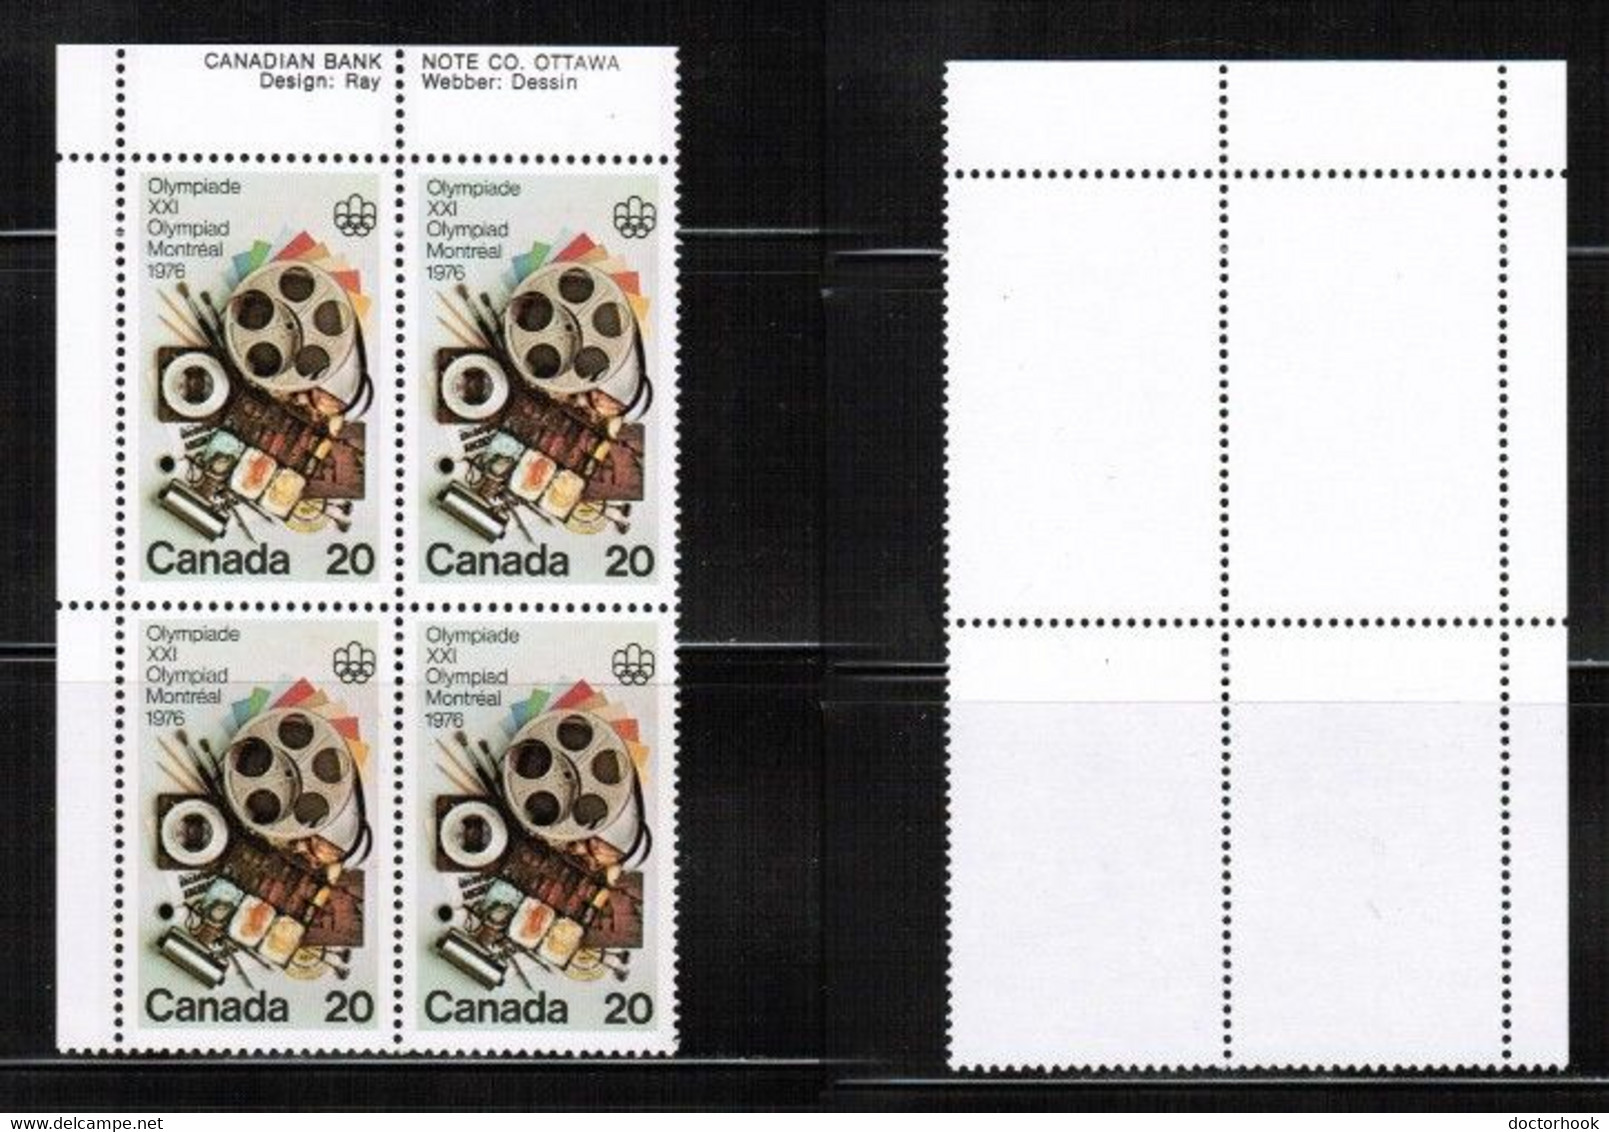 CANADA   Scott # 684** MINT NH INSCRIPTION BLOCK Of 4 CONDITION AS PER SCAN (LG-1467) - Plate Number & Inscriptions